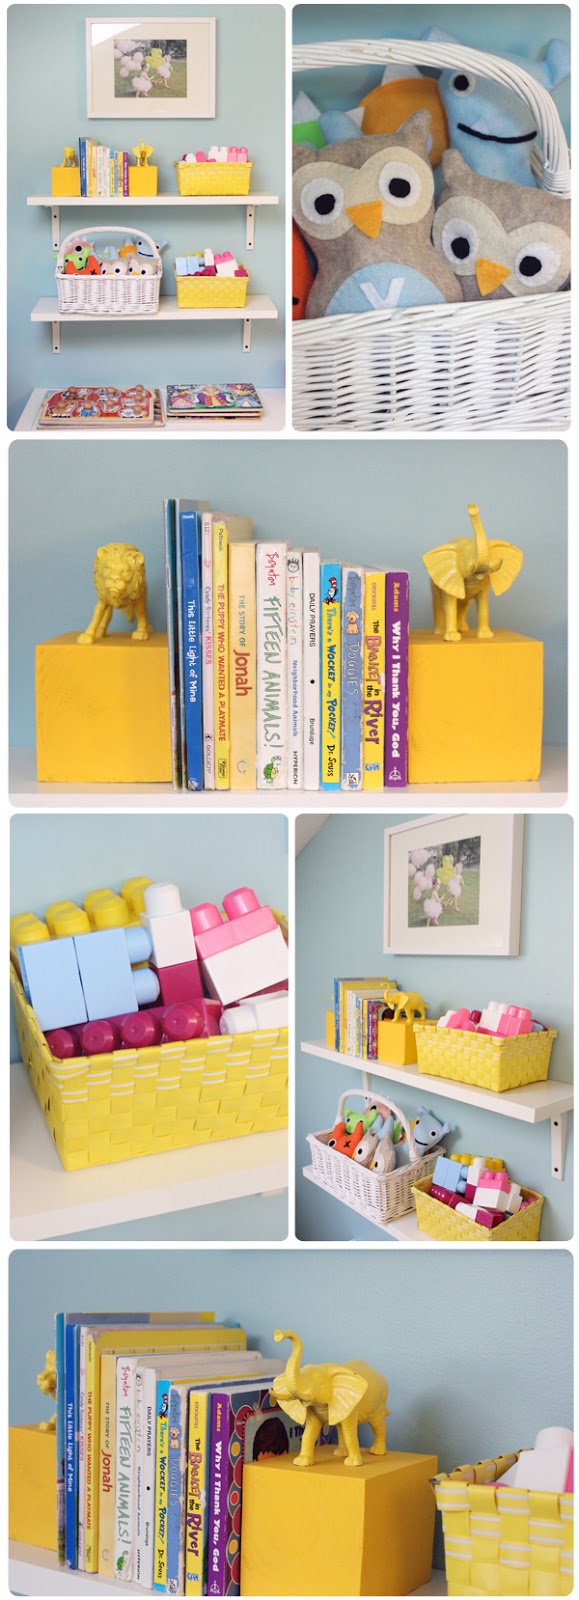 Our Playroom Reveal – DIY Details & Storage Solutions!